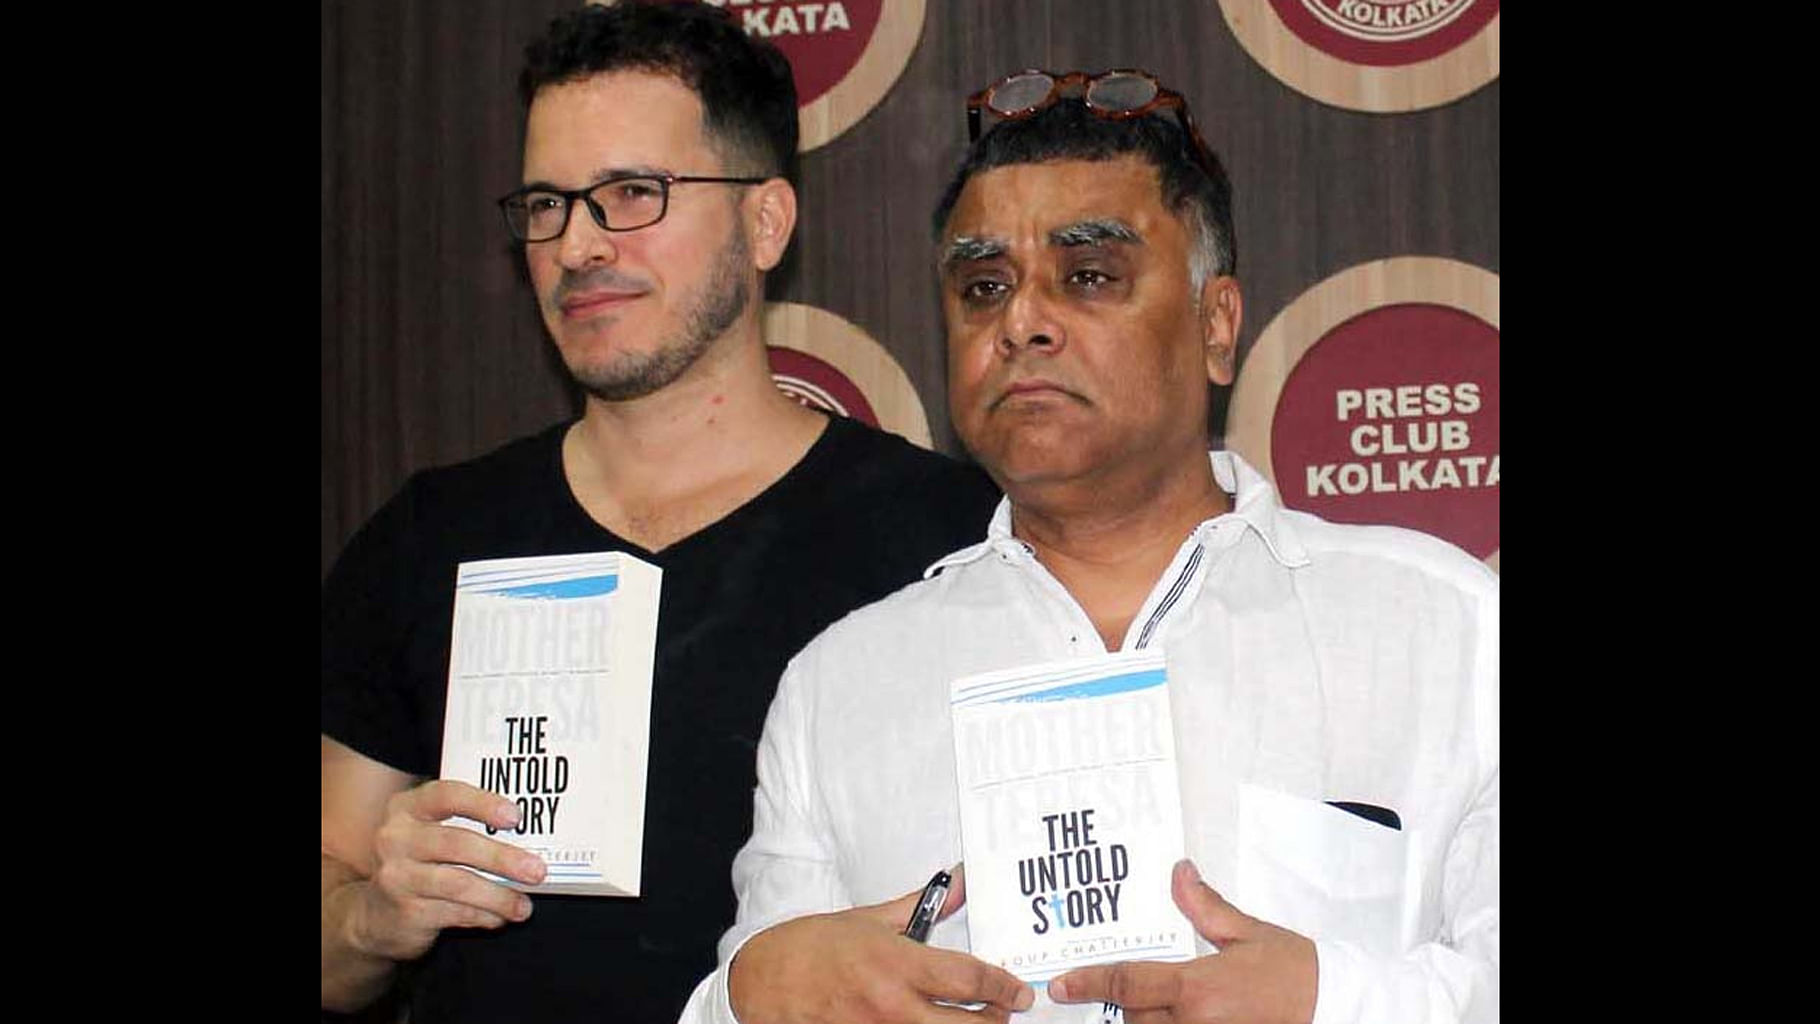 India-born physician Aroup Chatterjee with social worker Hemley Gonzalez at the release of  <i>Mother Teresa The Untold Story</i> in Kolkata, on June 13. (Photo: IANS)